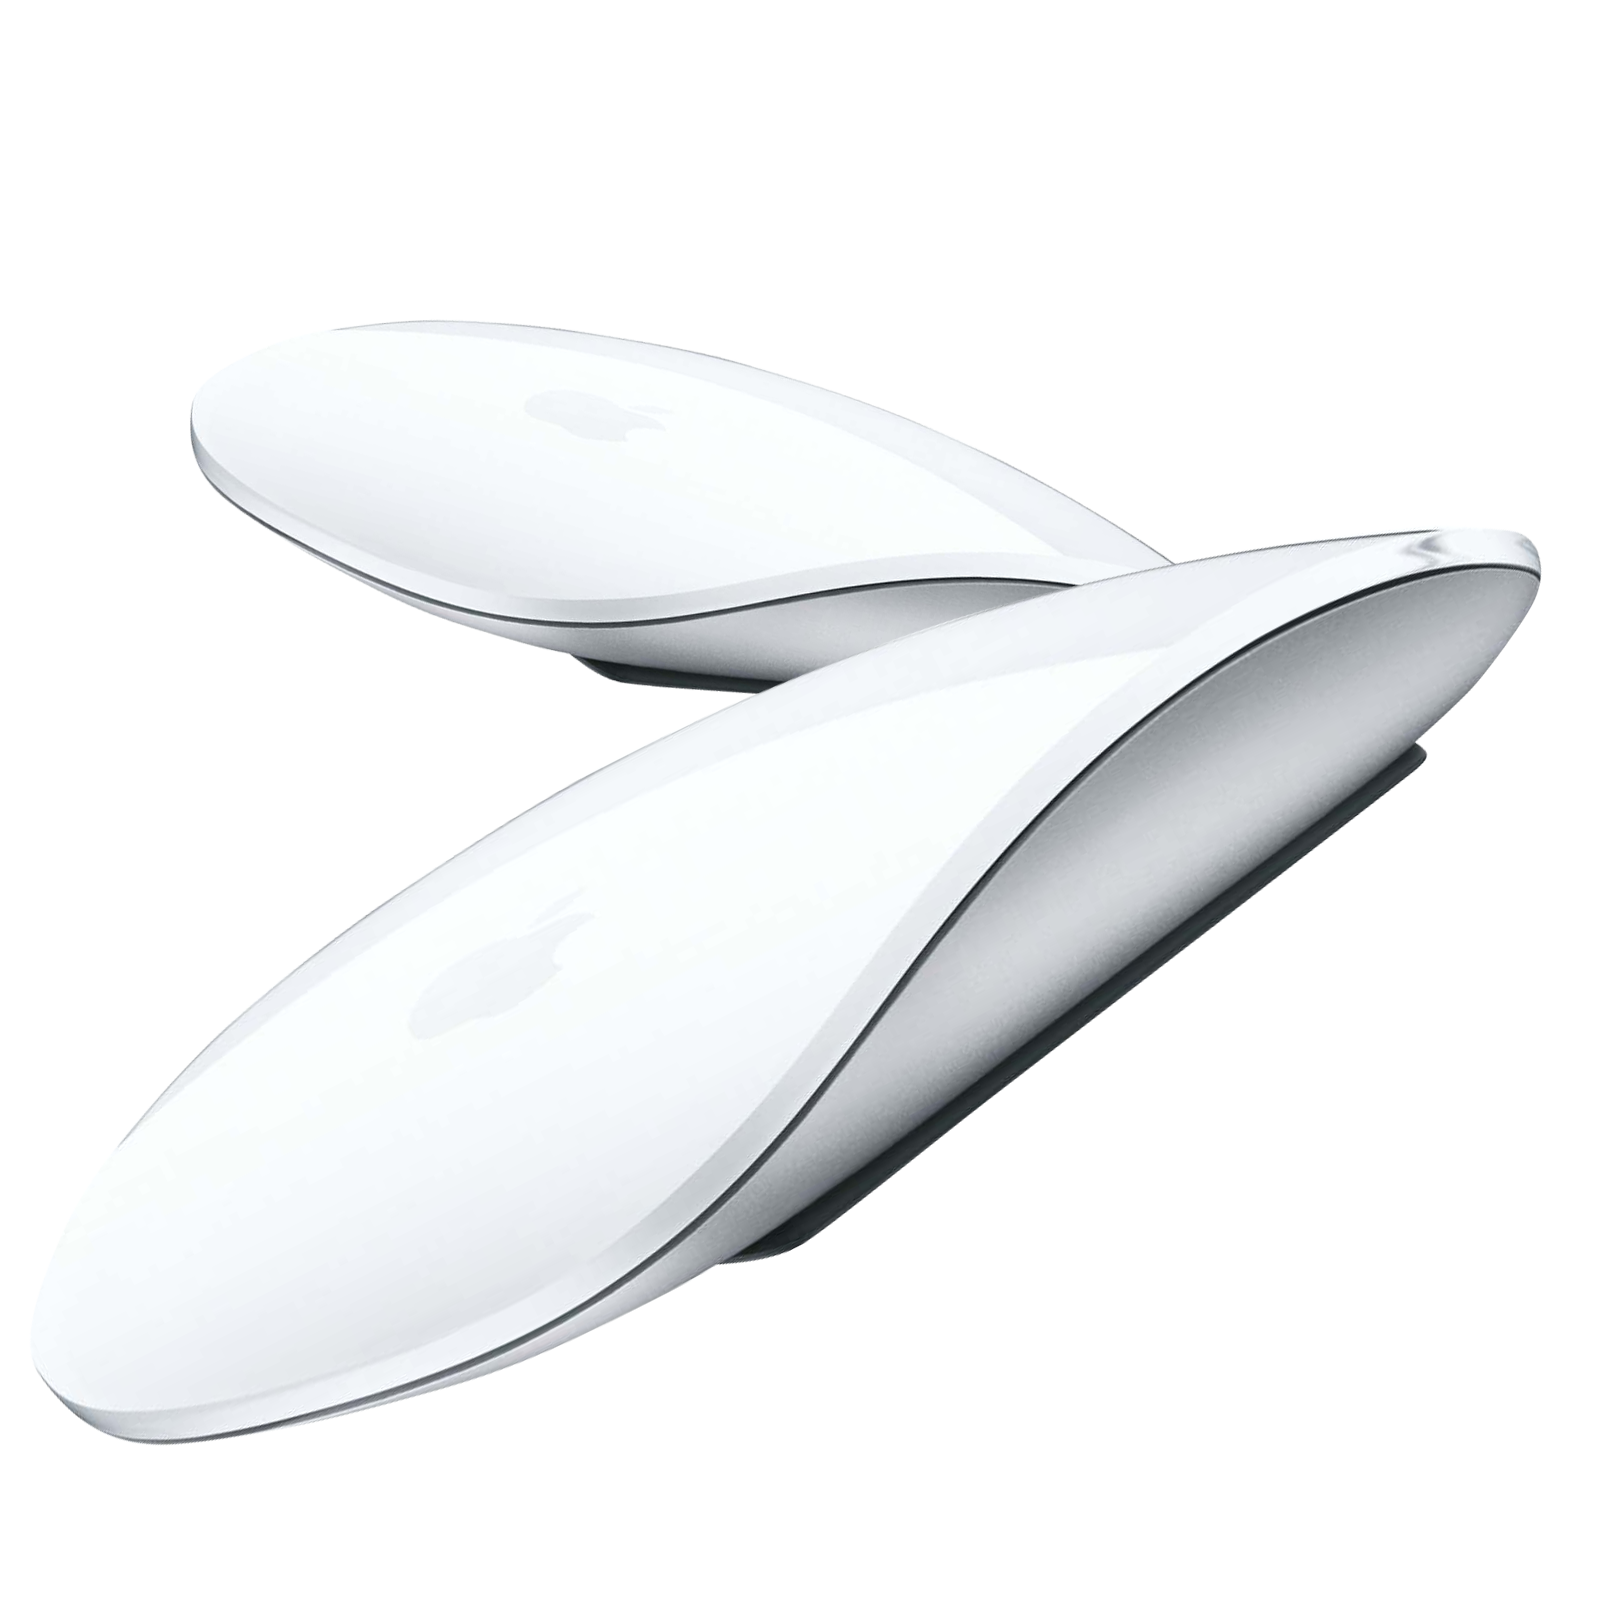 https://www.imore.com/sites/imore.com/files/topic_images/2015/topic-new-Magic-Mouse-2.png?itok=pMgoLBJI